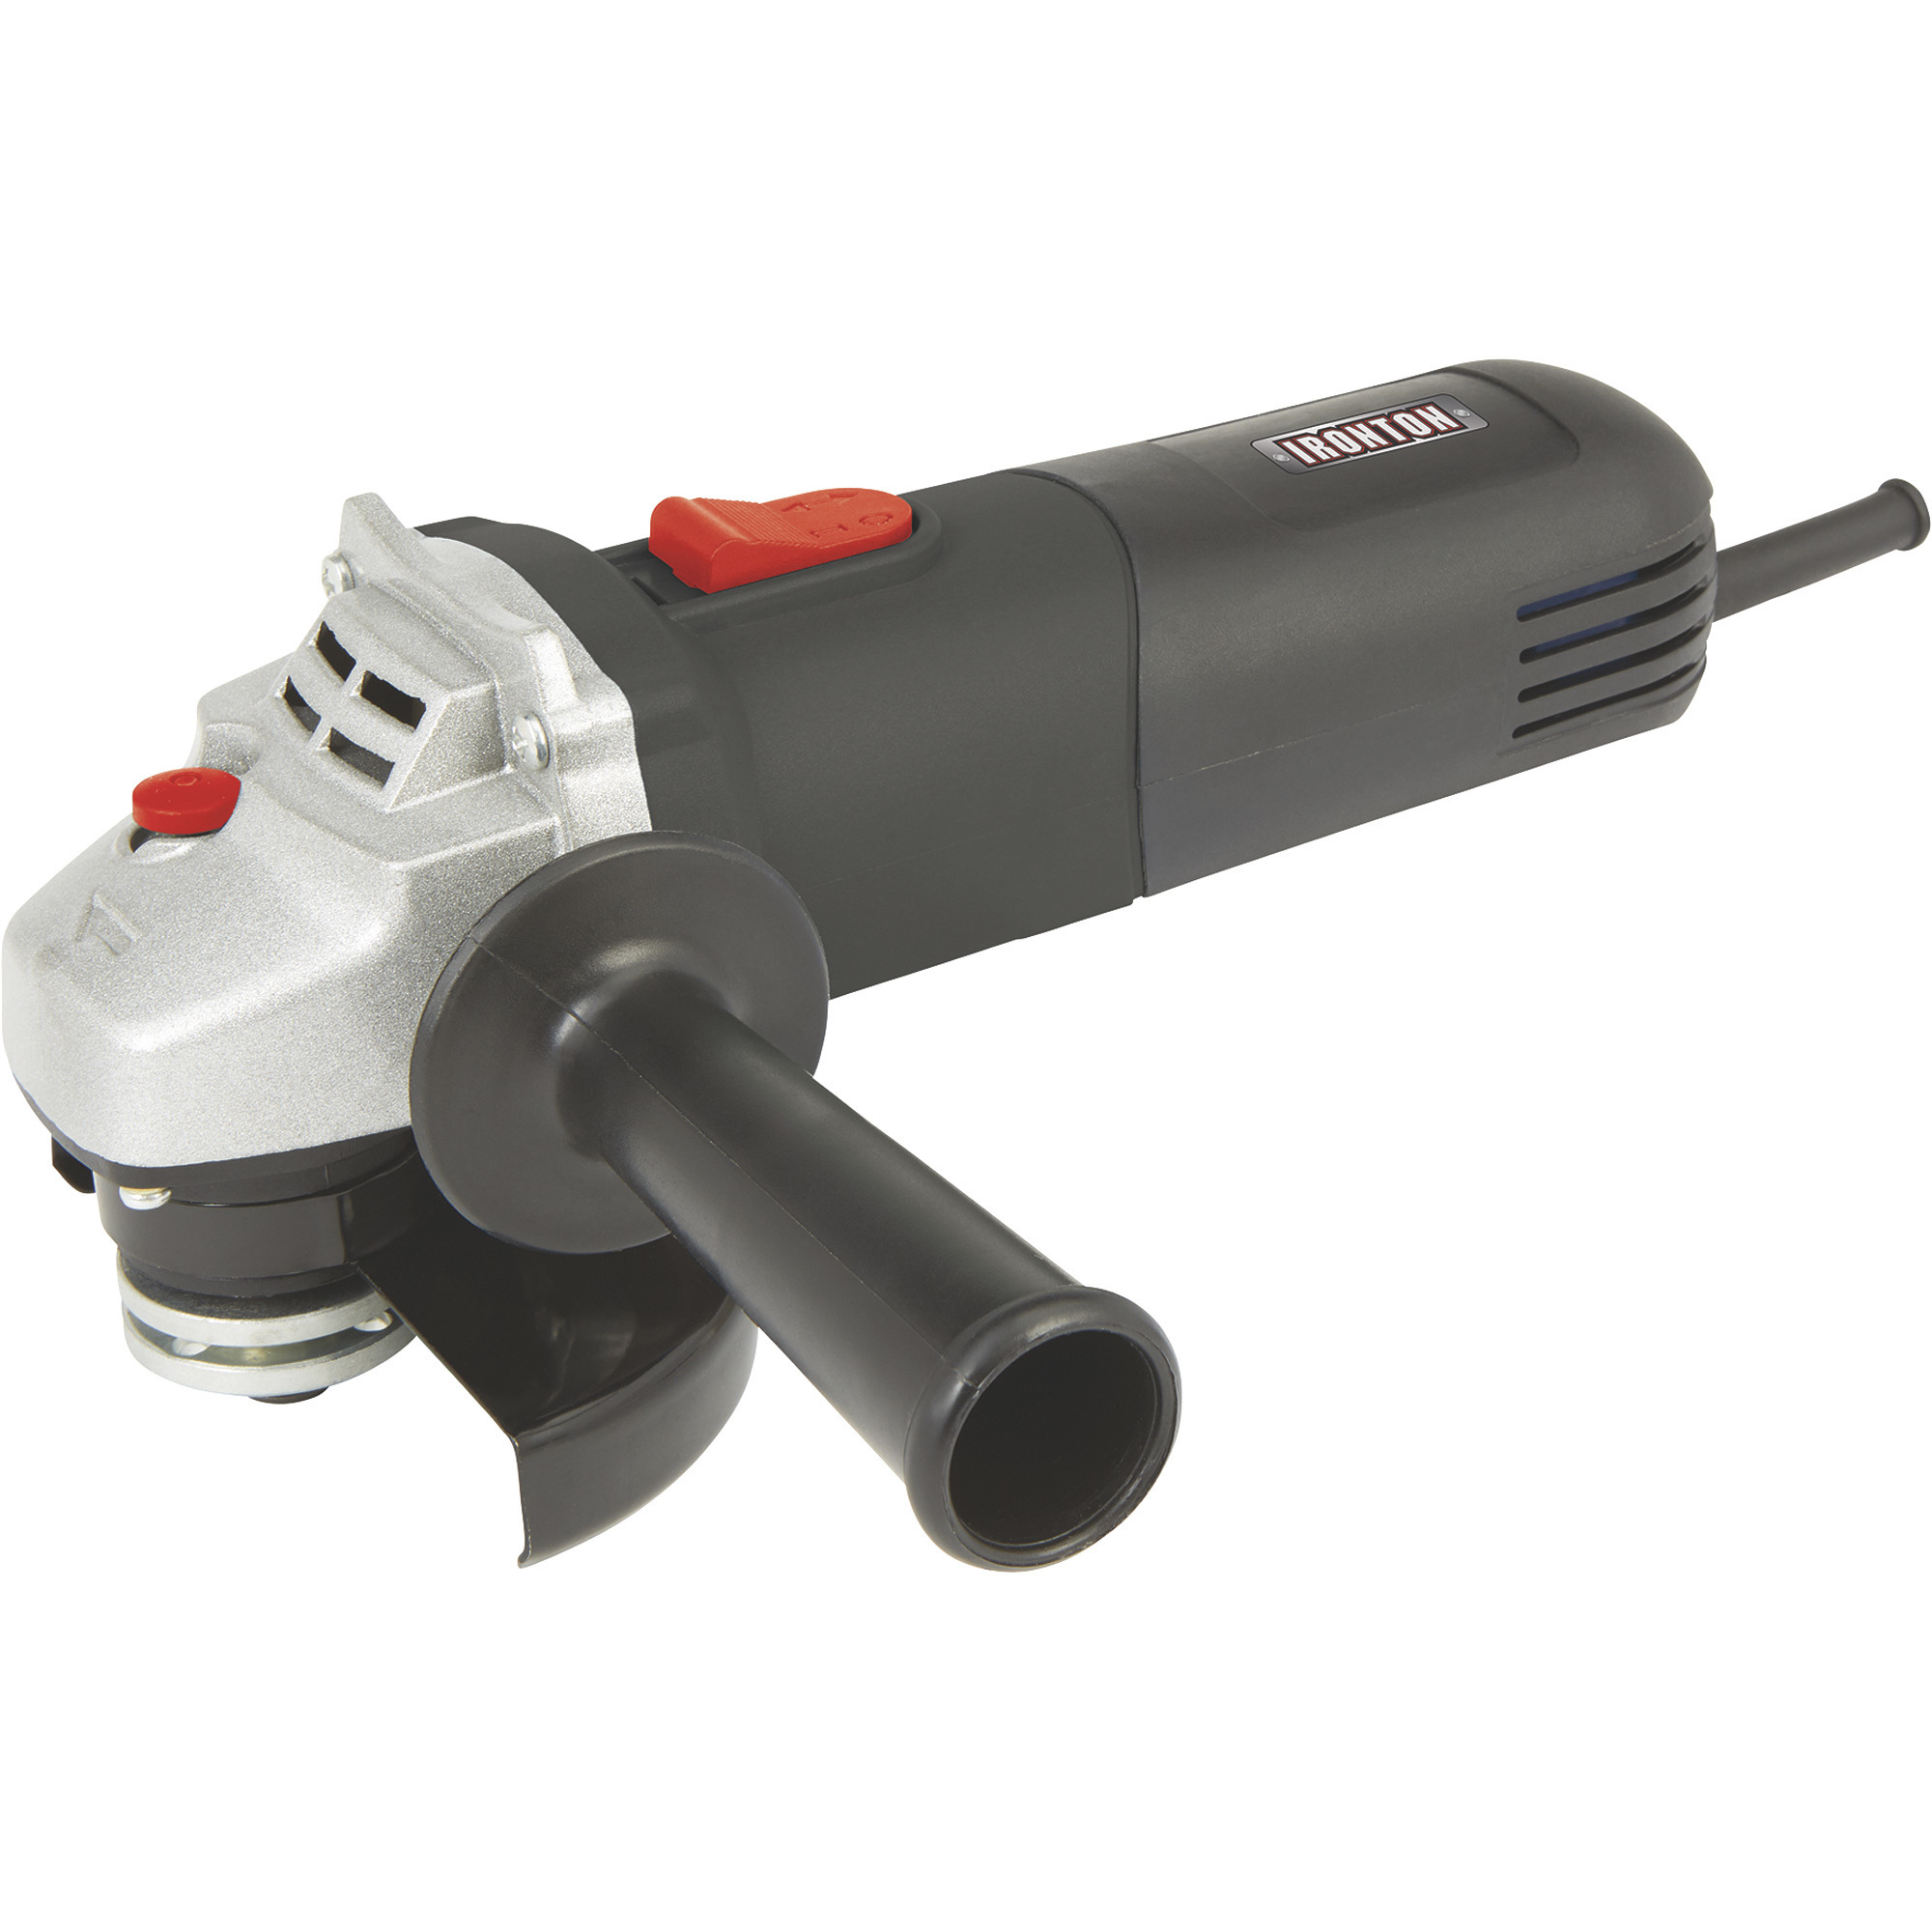 Please see replacement Item# 4975147. Ironton 1/2in. Angle Grinder — 4.3  Amp, 110 Volt, 11,000 RPM Northern Tool